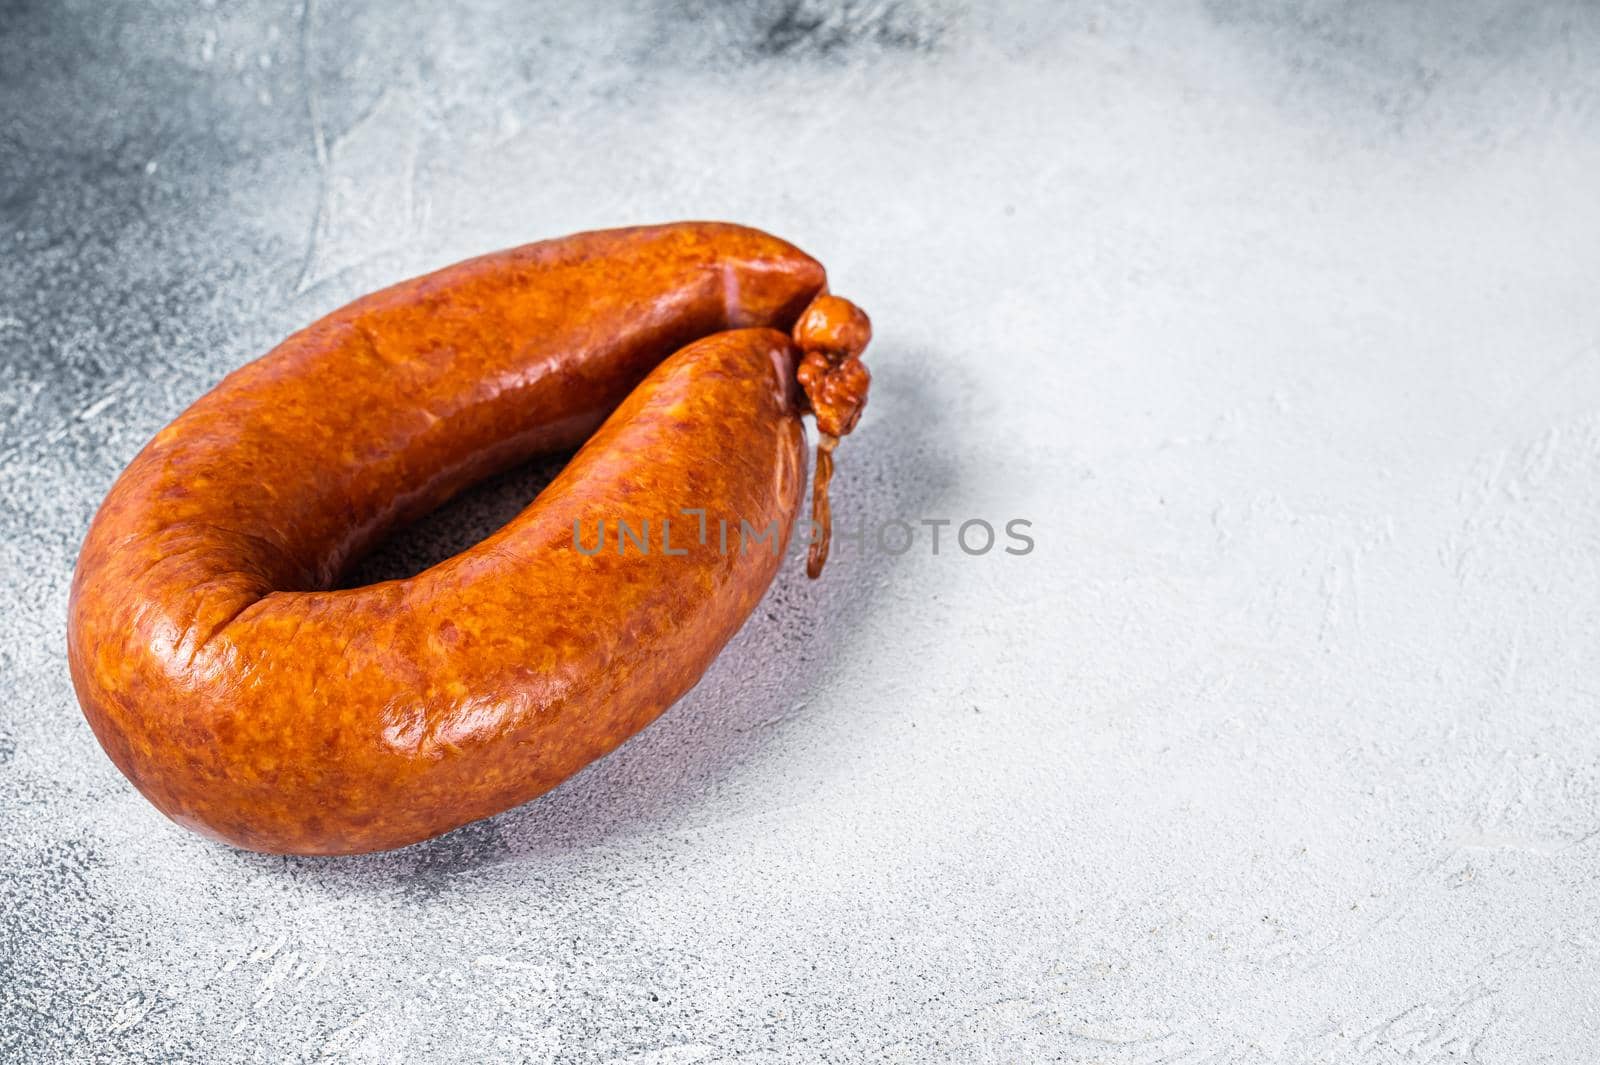 Smoked sausage on a white rustic table. White background. Top view. Copy space.